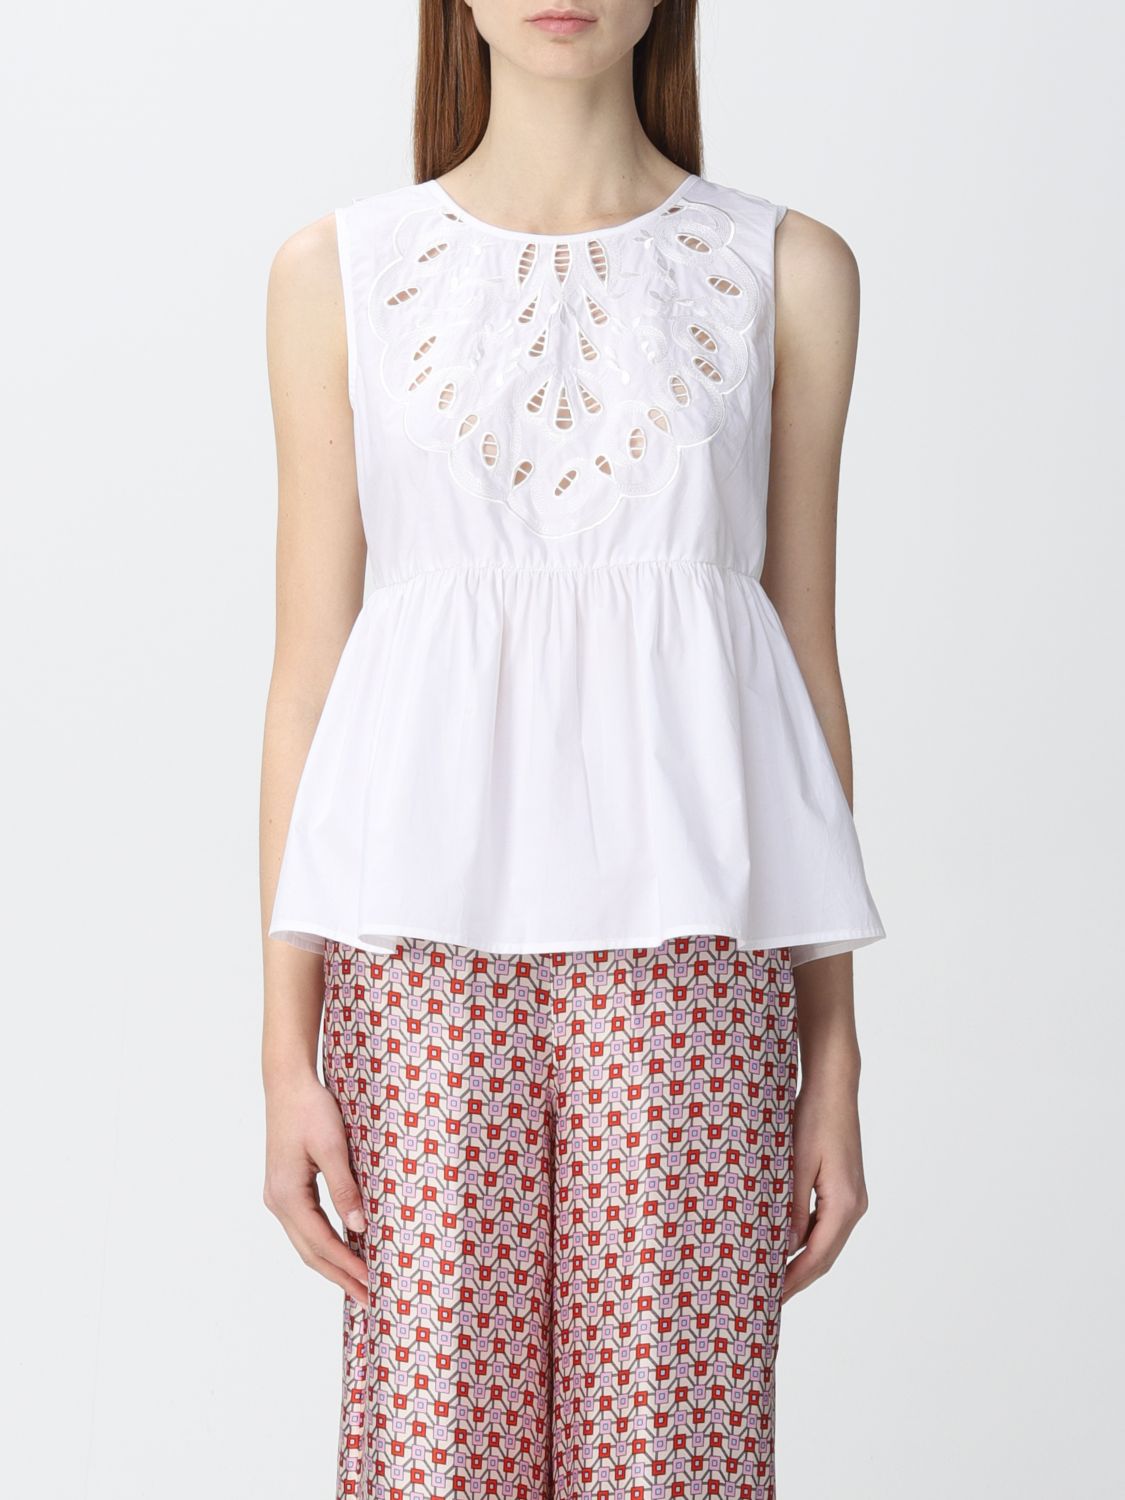 Liu •jo Top With Embroidery In White